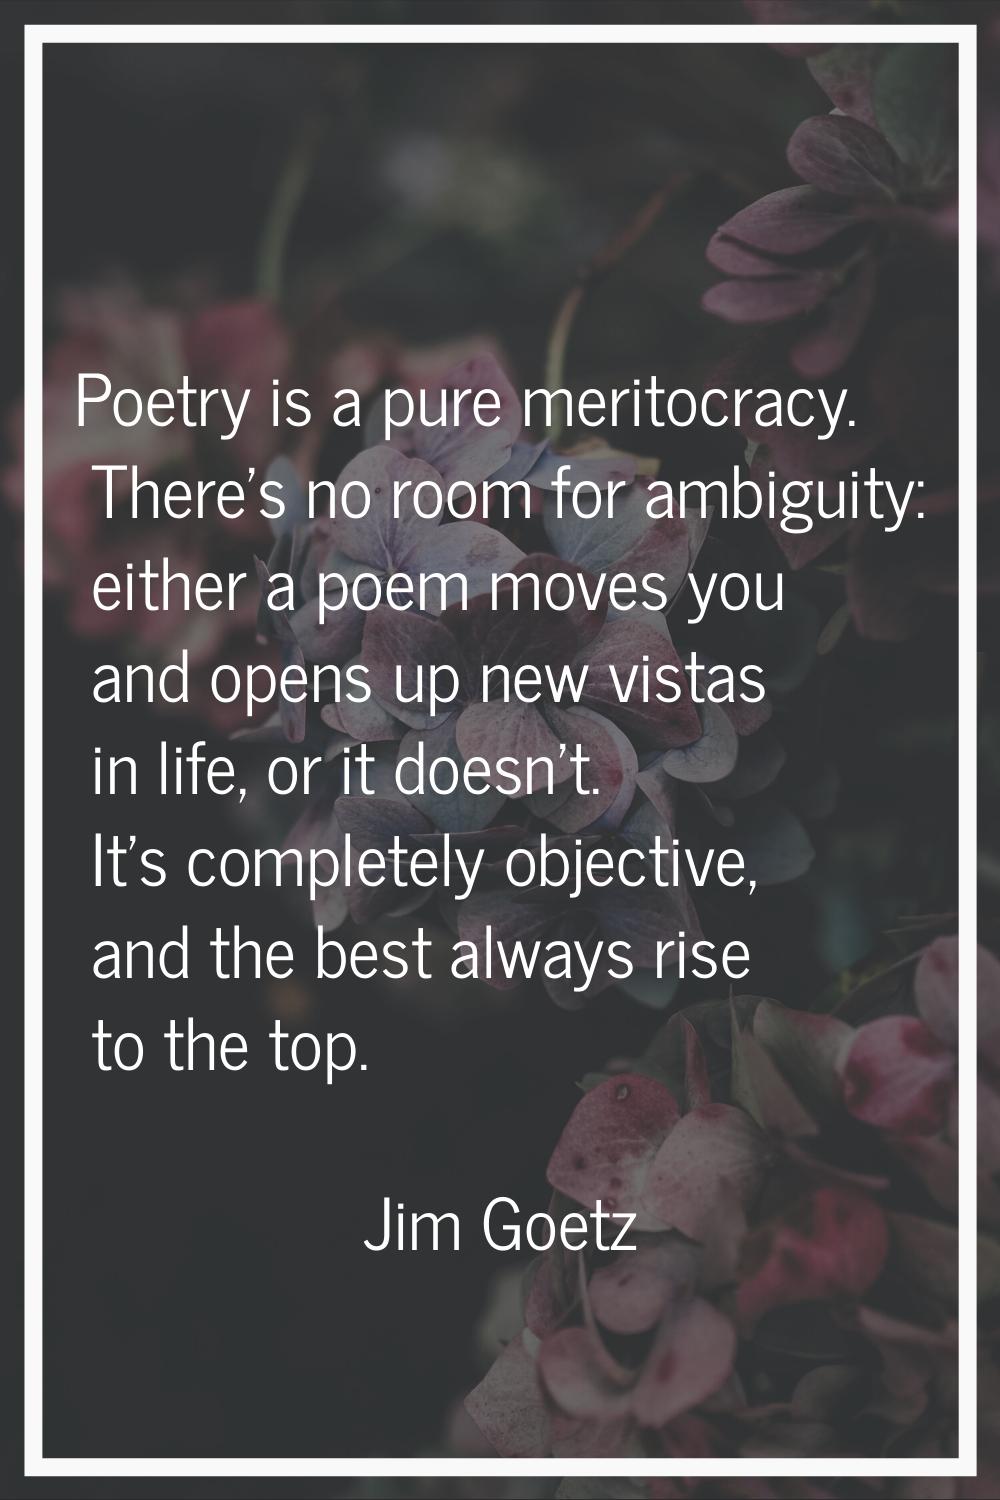 Poetry is a pure meritocracy. There's no room for ambiguity: either a poem moves you and opens up n